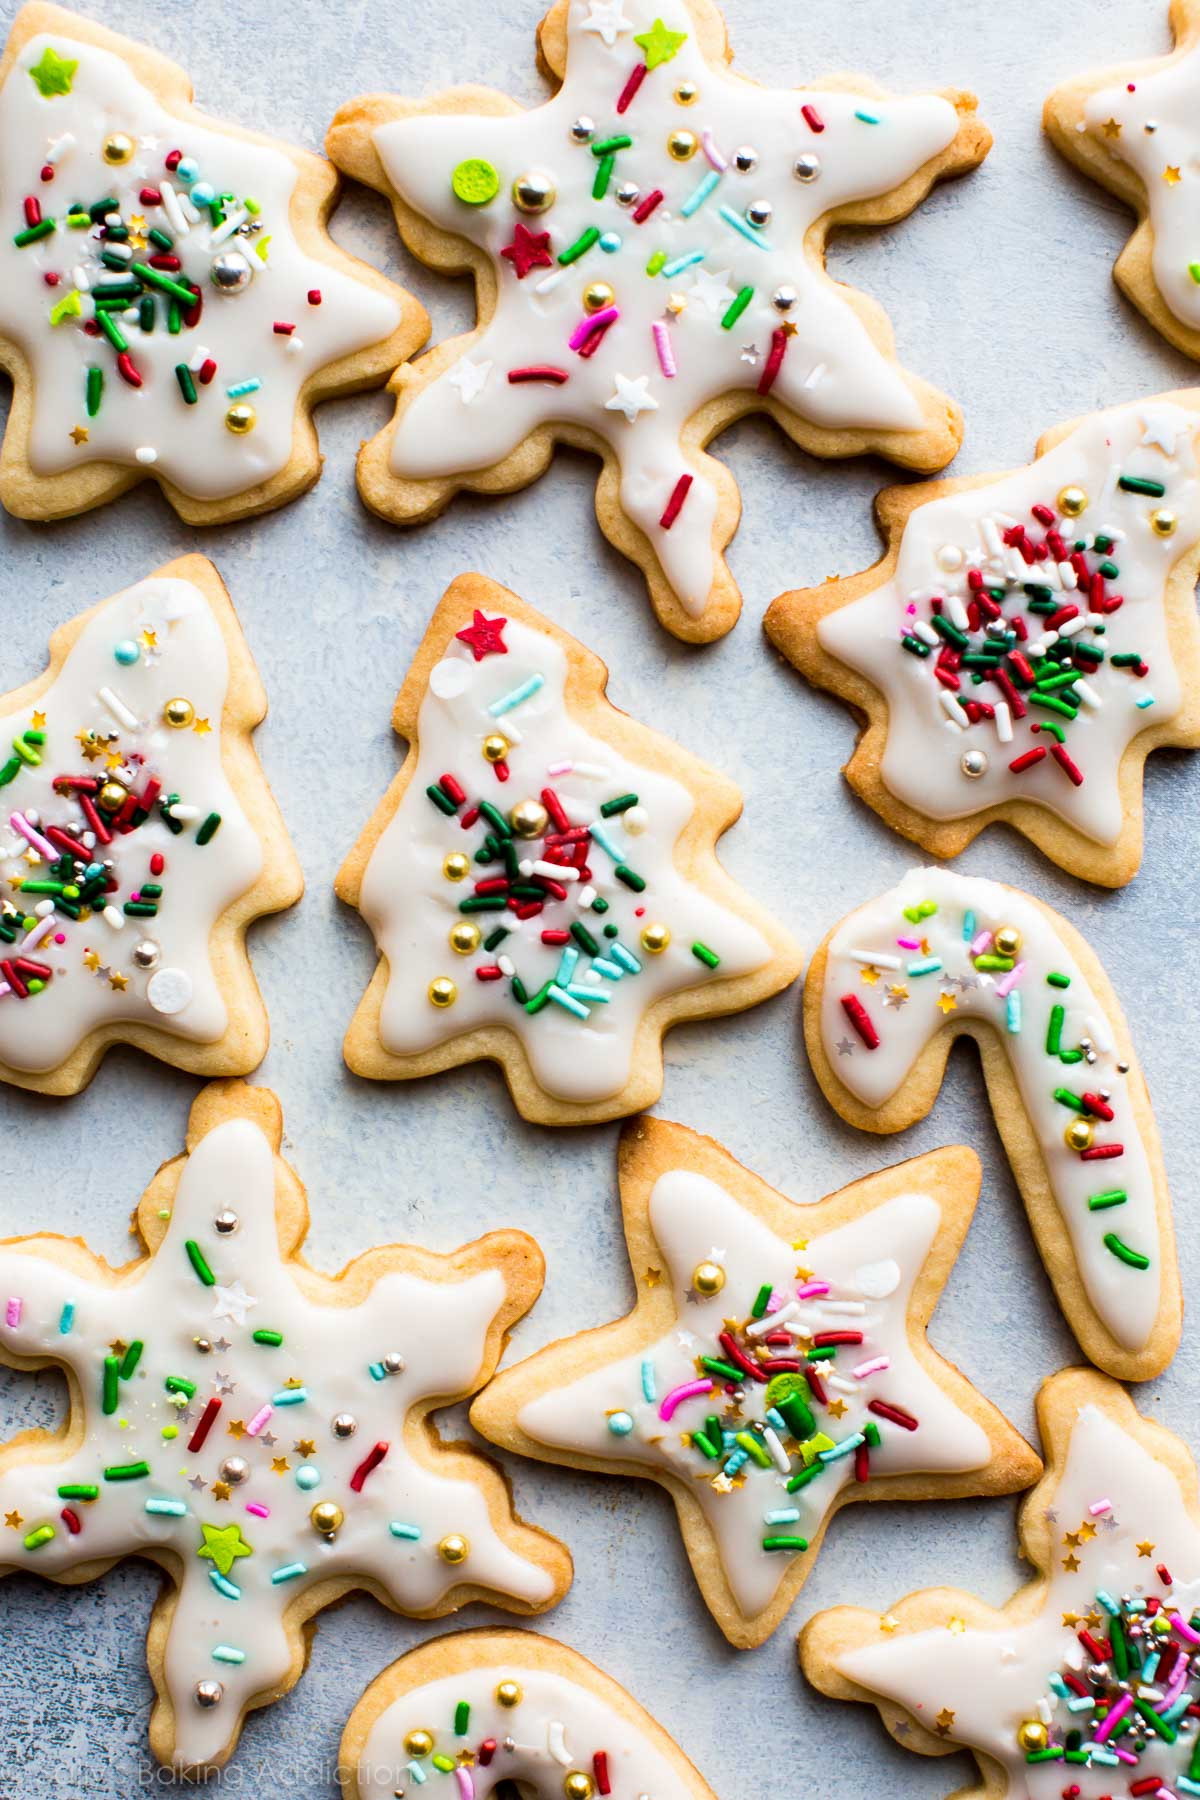 Baking Christmas Cookie
 Holiday Cut Out Sugar Cookies with Easy Icing Sallys